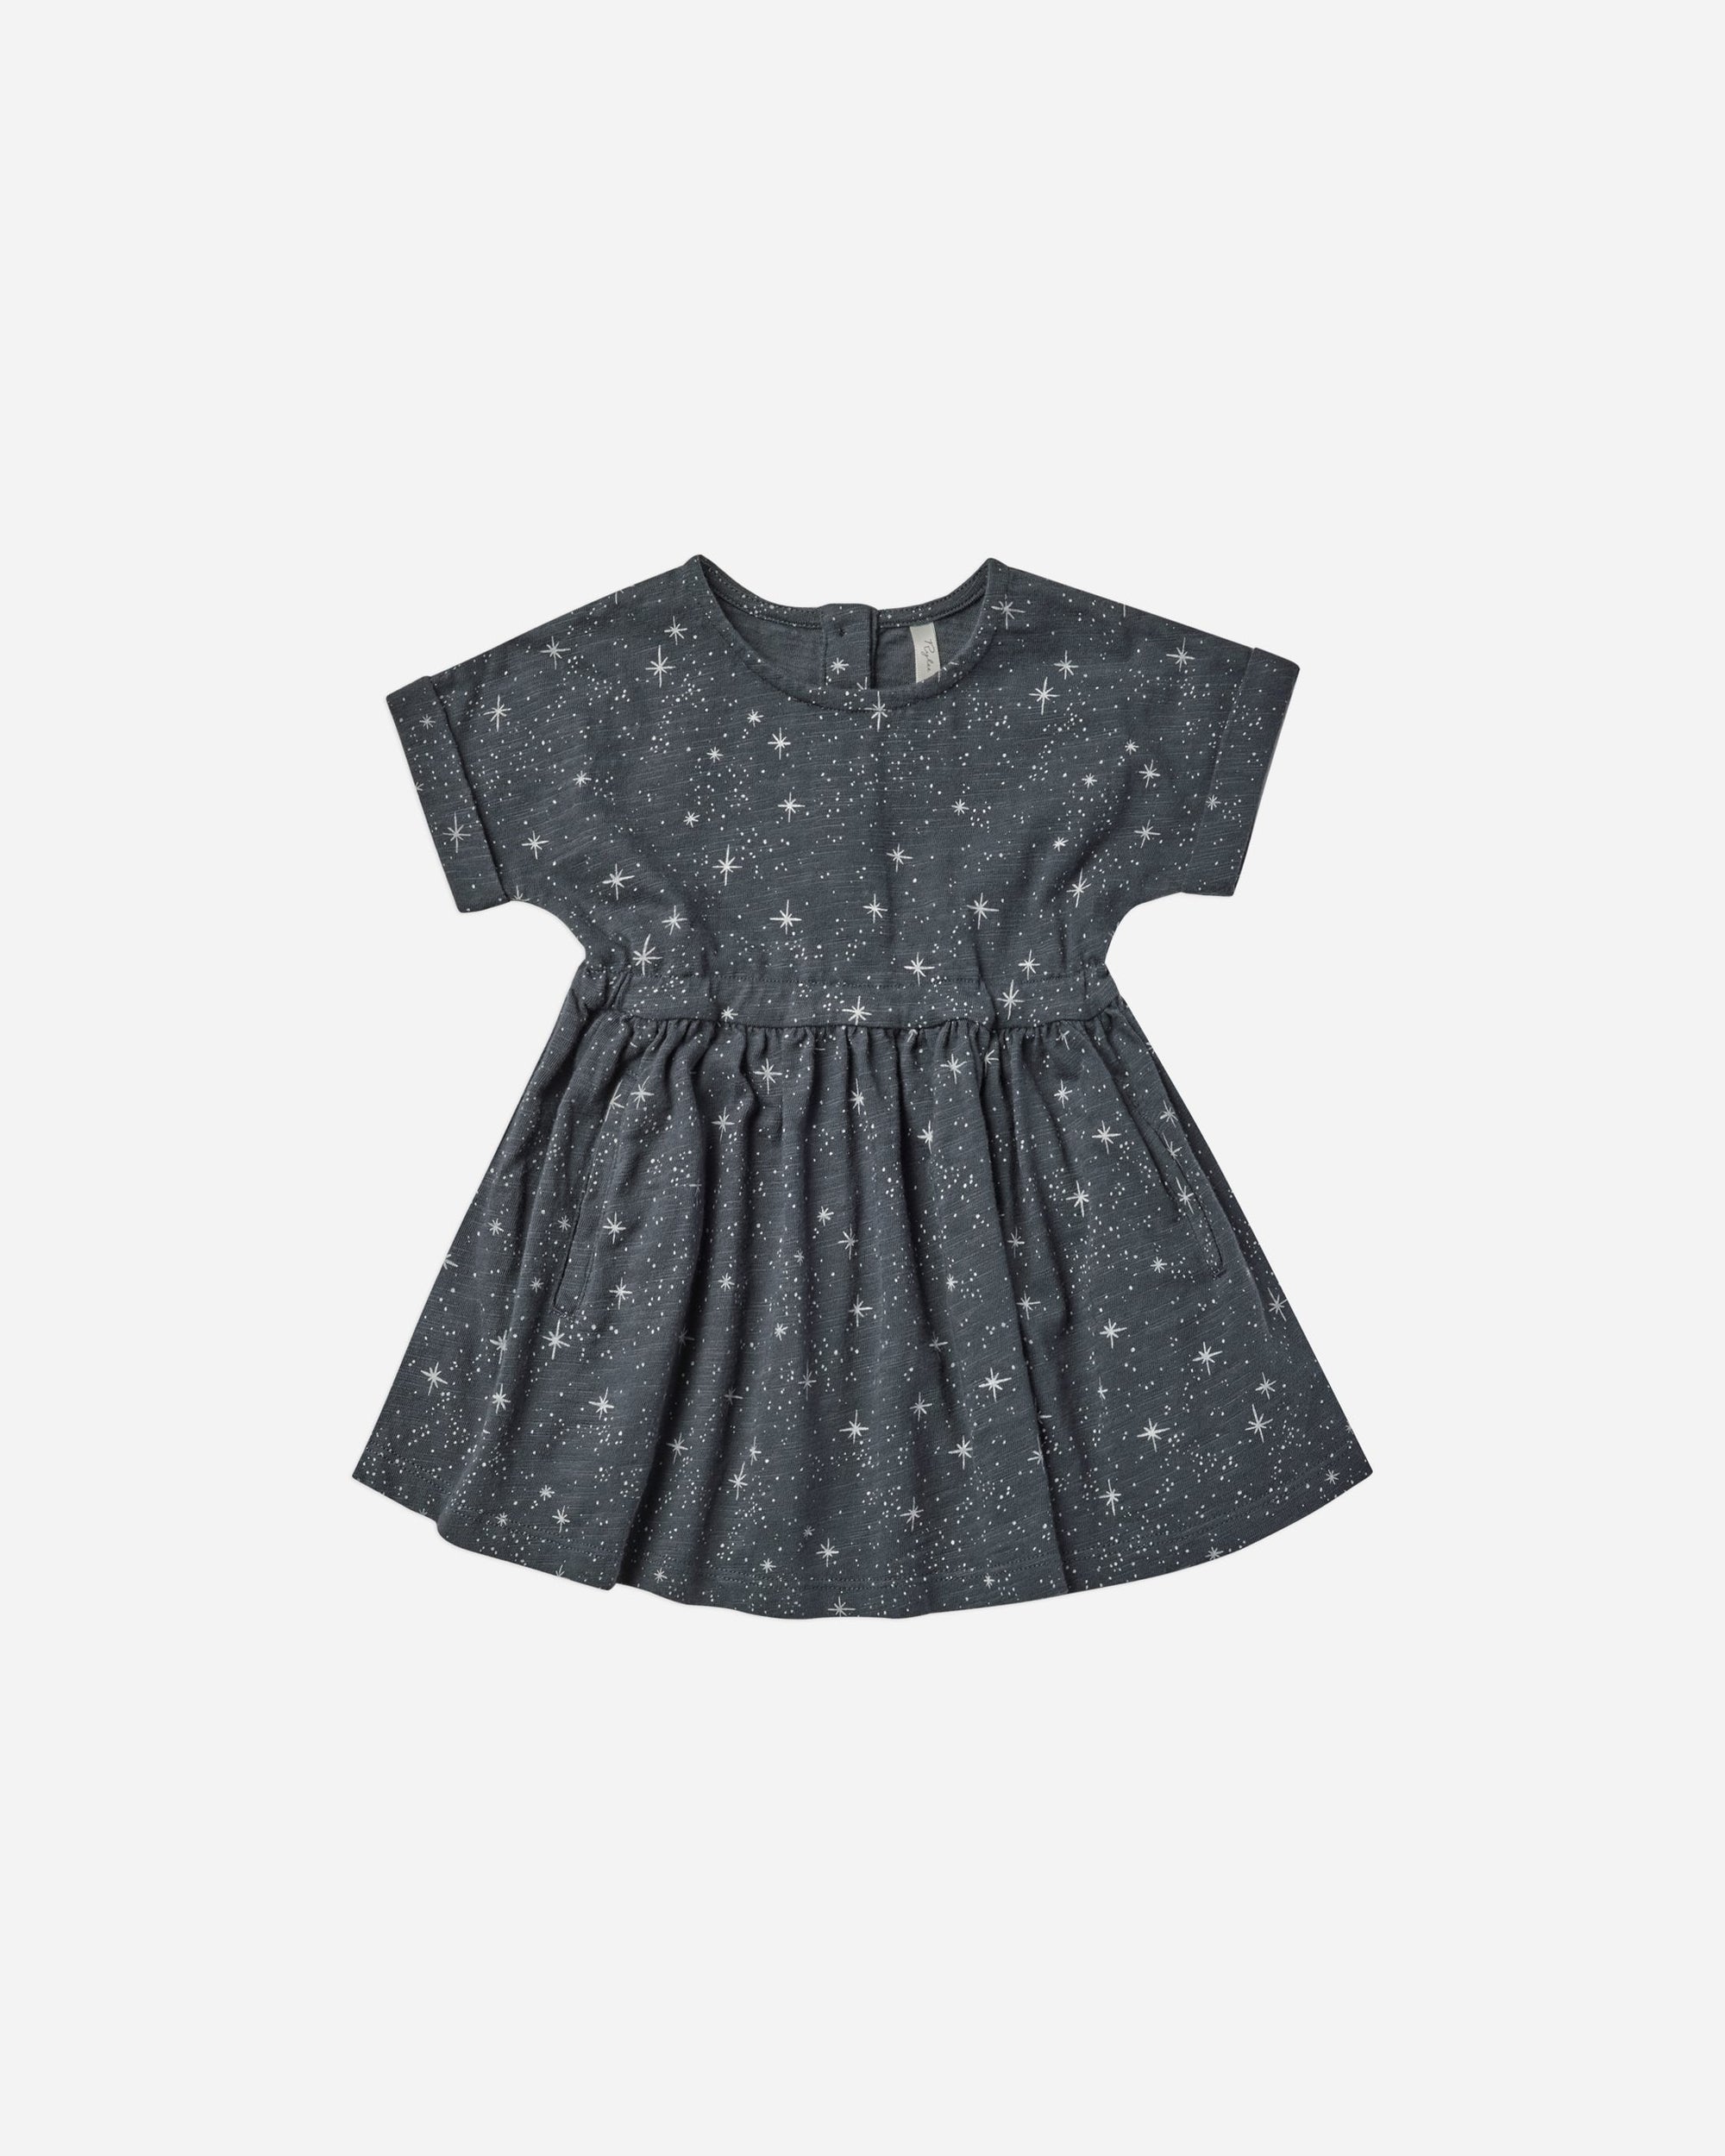 kat t-shirt dress || night sky - Rylee + Cru | Kids Clothes | Trendy Baby Clothes | Modern Infant Outfits |